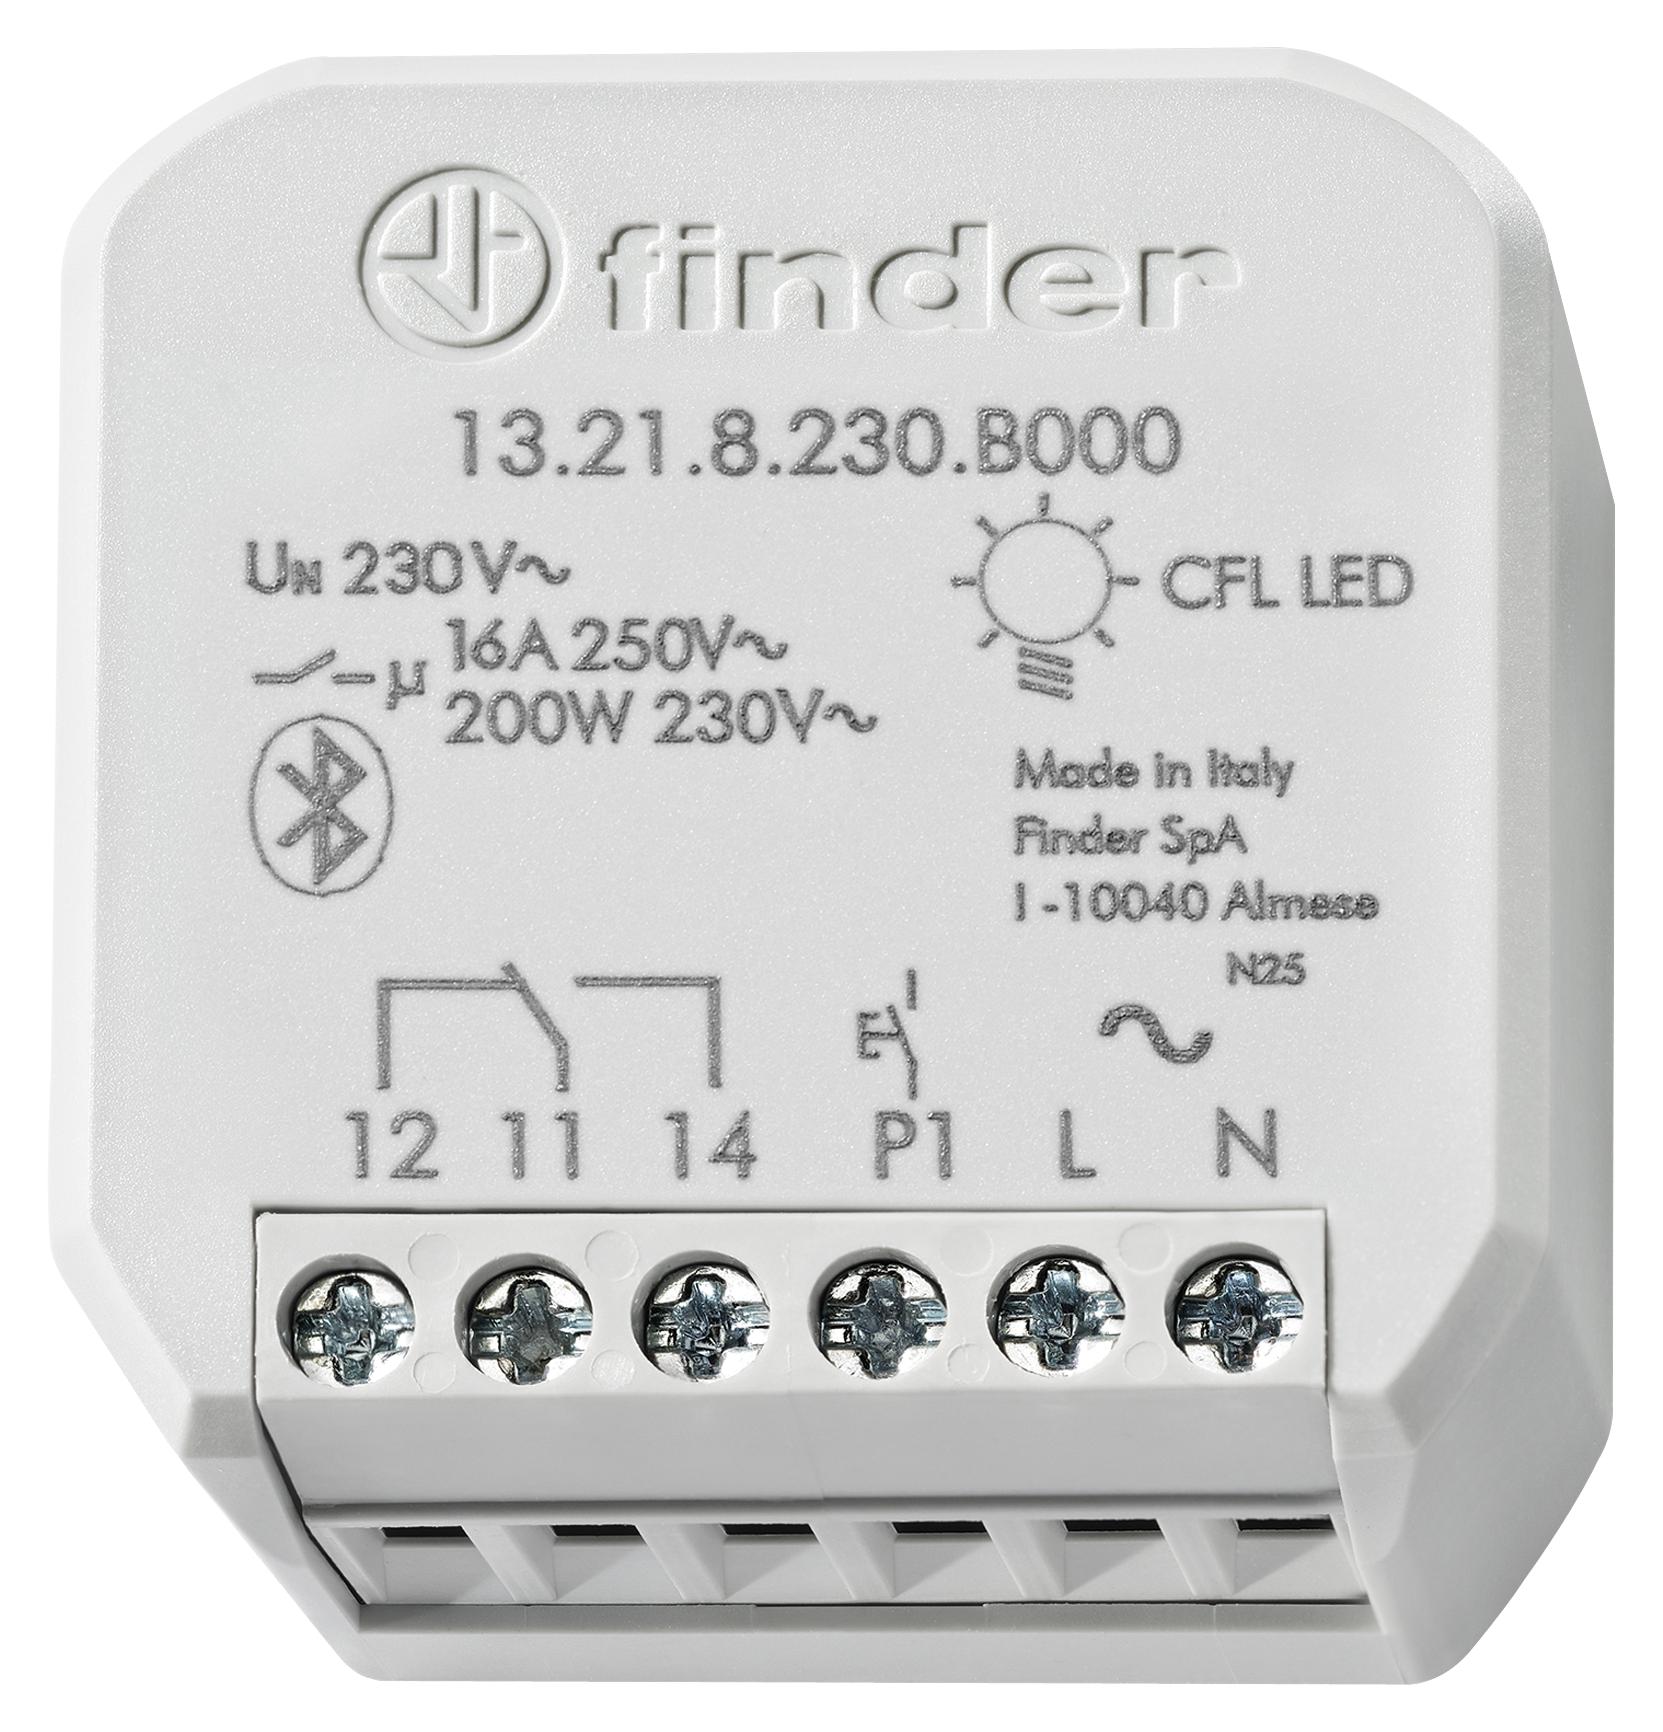 Finder Relays Relays 13.21.8.230.b000 Multi Function Relay, 1P, 16A, Yesly Ble